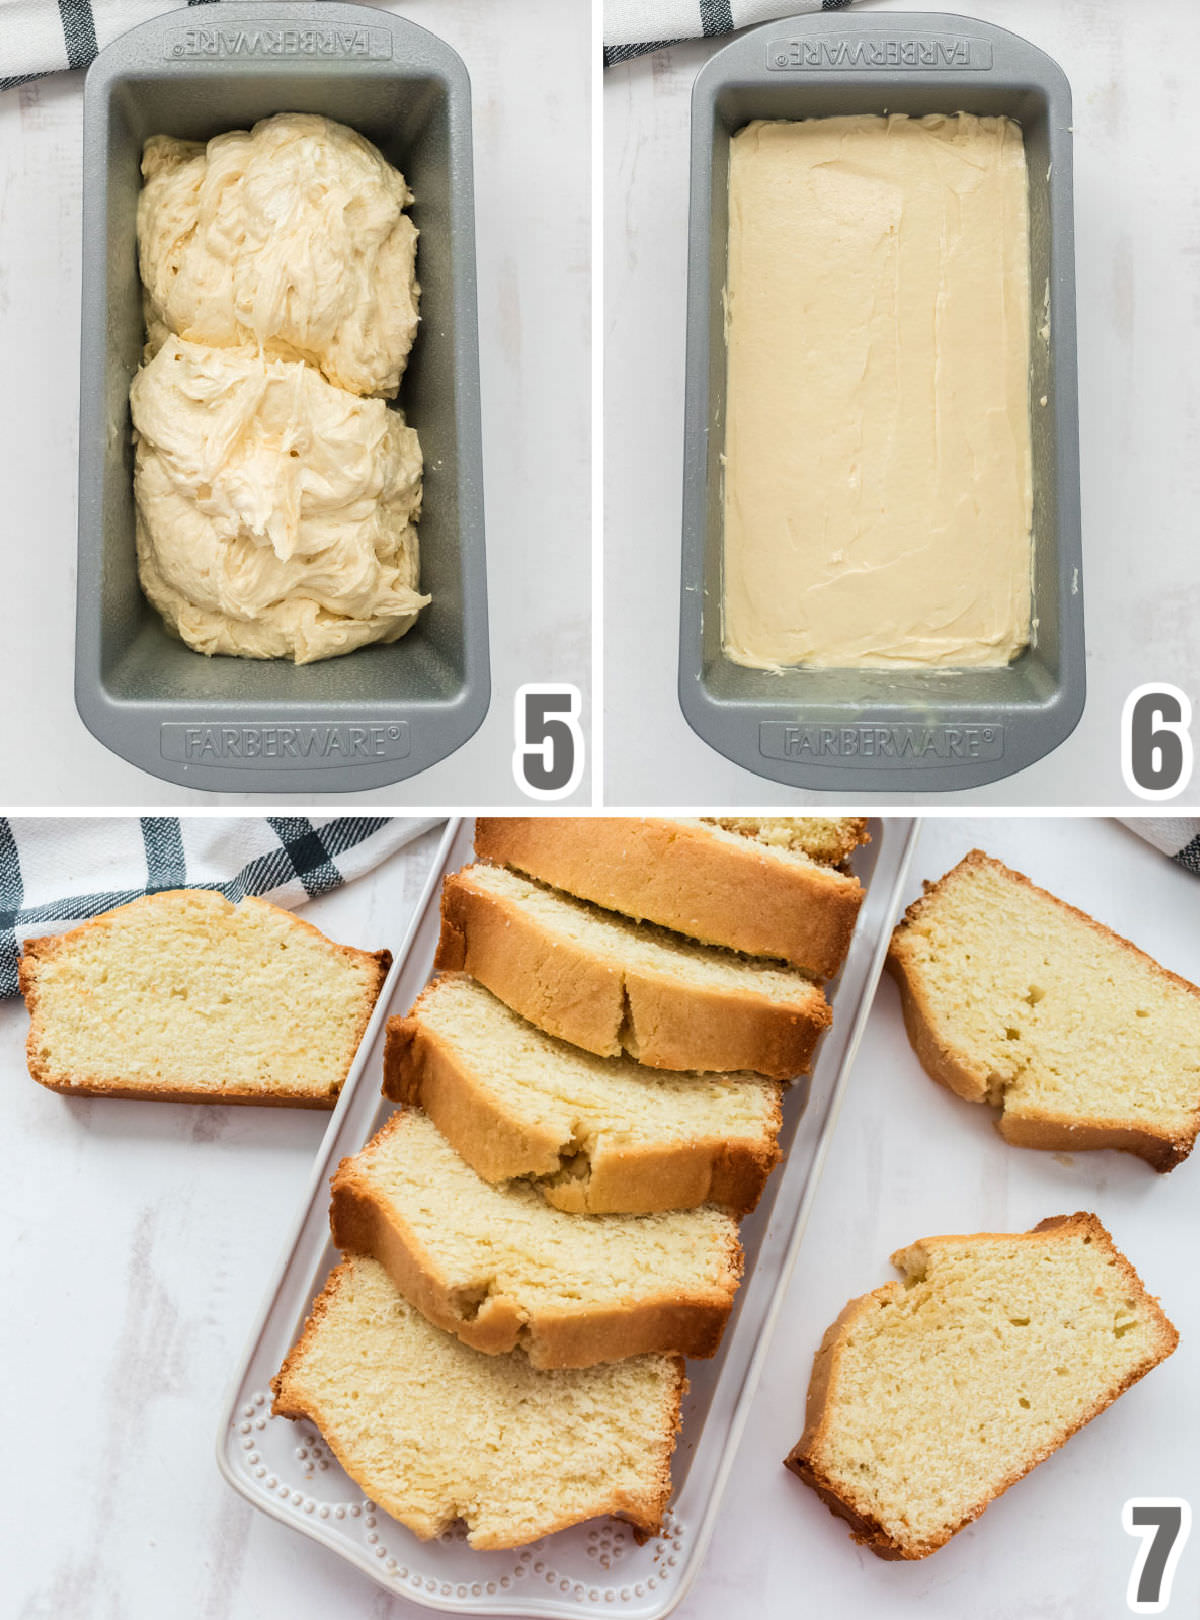 Collage image showing the step for baking Pound Cake including a cooled pound cake sliced into pieces.